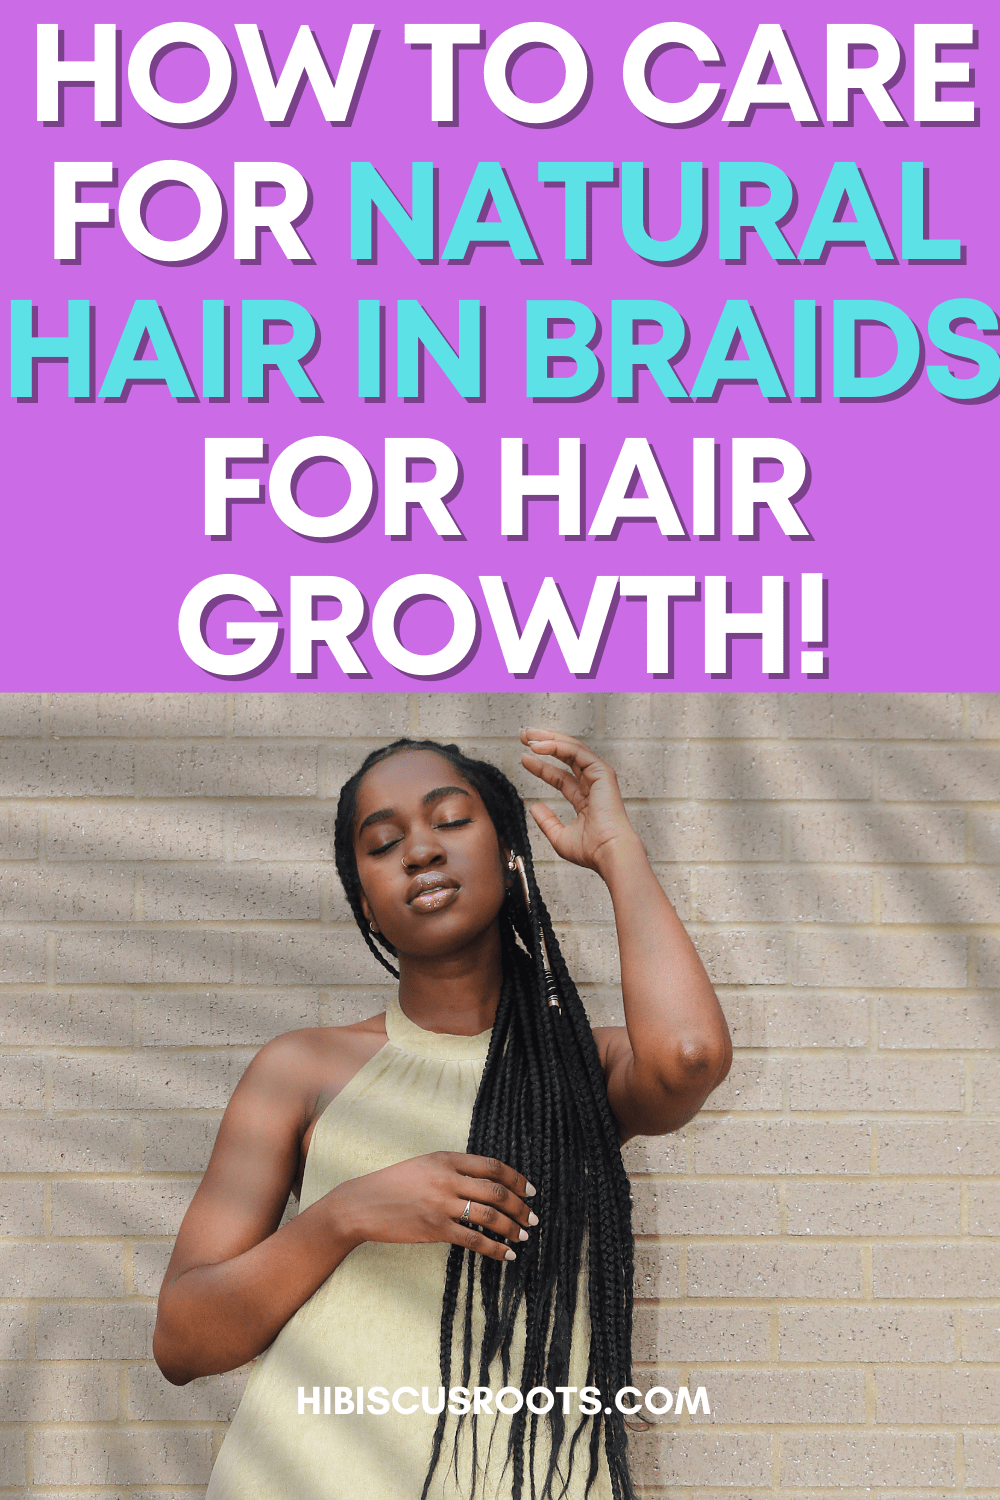 13 Best Ways to Care for Natural Hair Before, During, & After Braids!